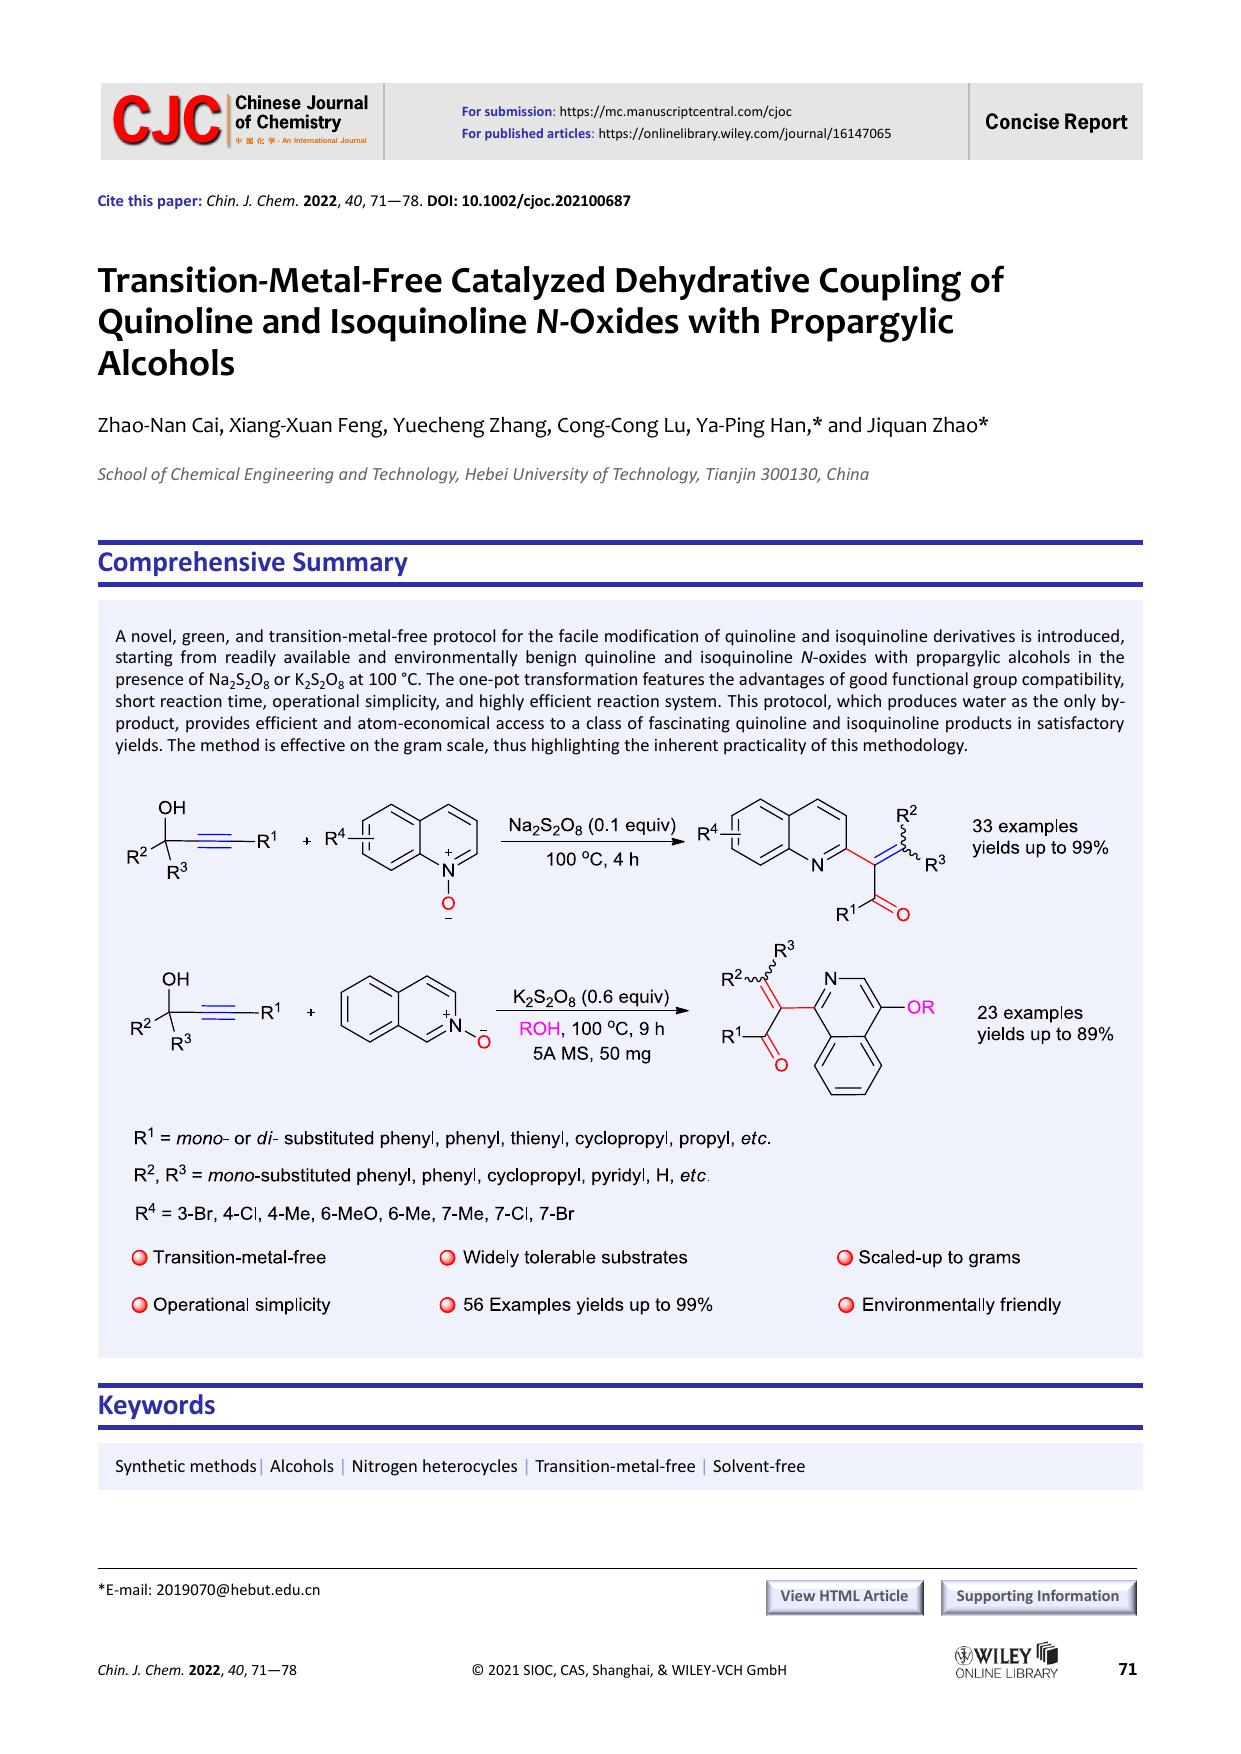 Transition-Metal-Free Catalyzed Dehydrative Coupling of Quino-line and Isoquinoline N-Oxides with Propargylic Alcohols by 佳悦